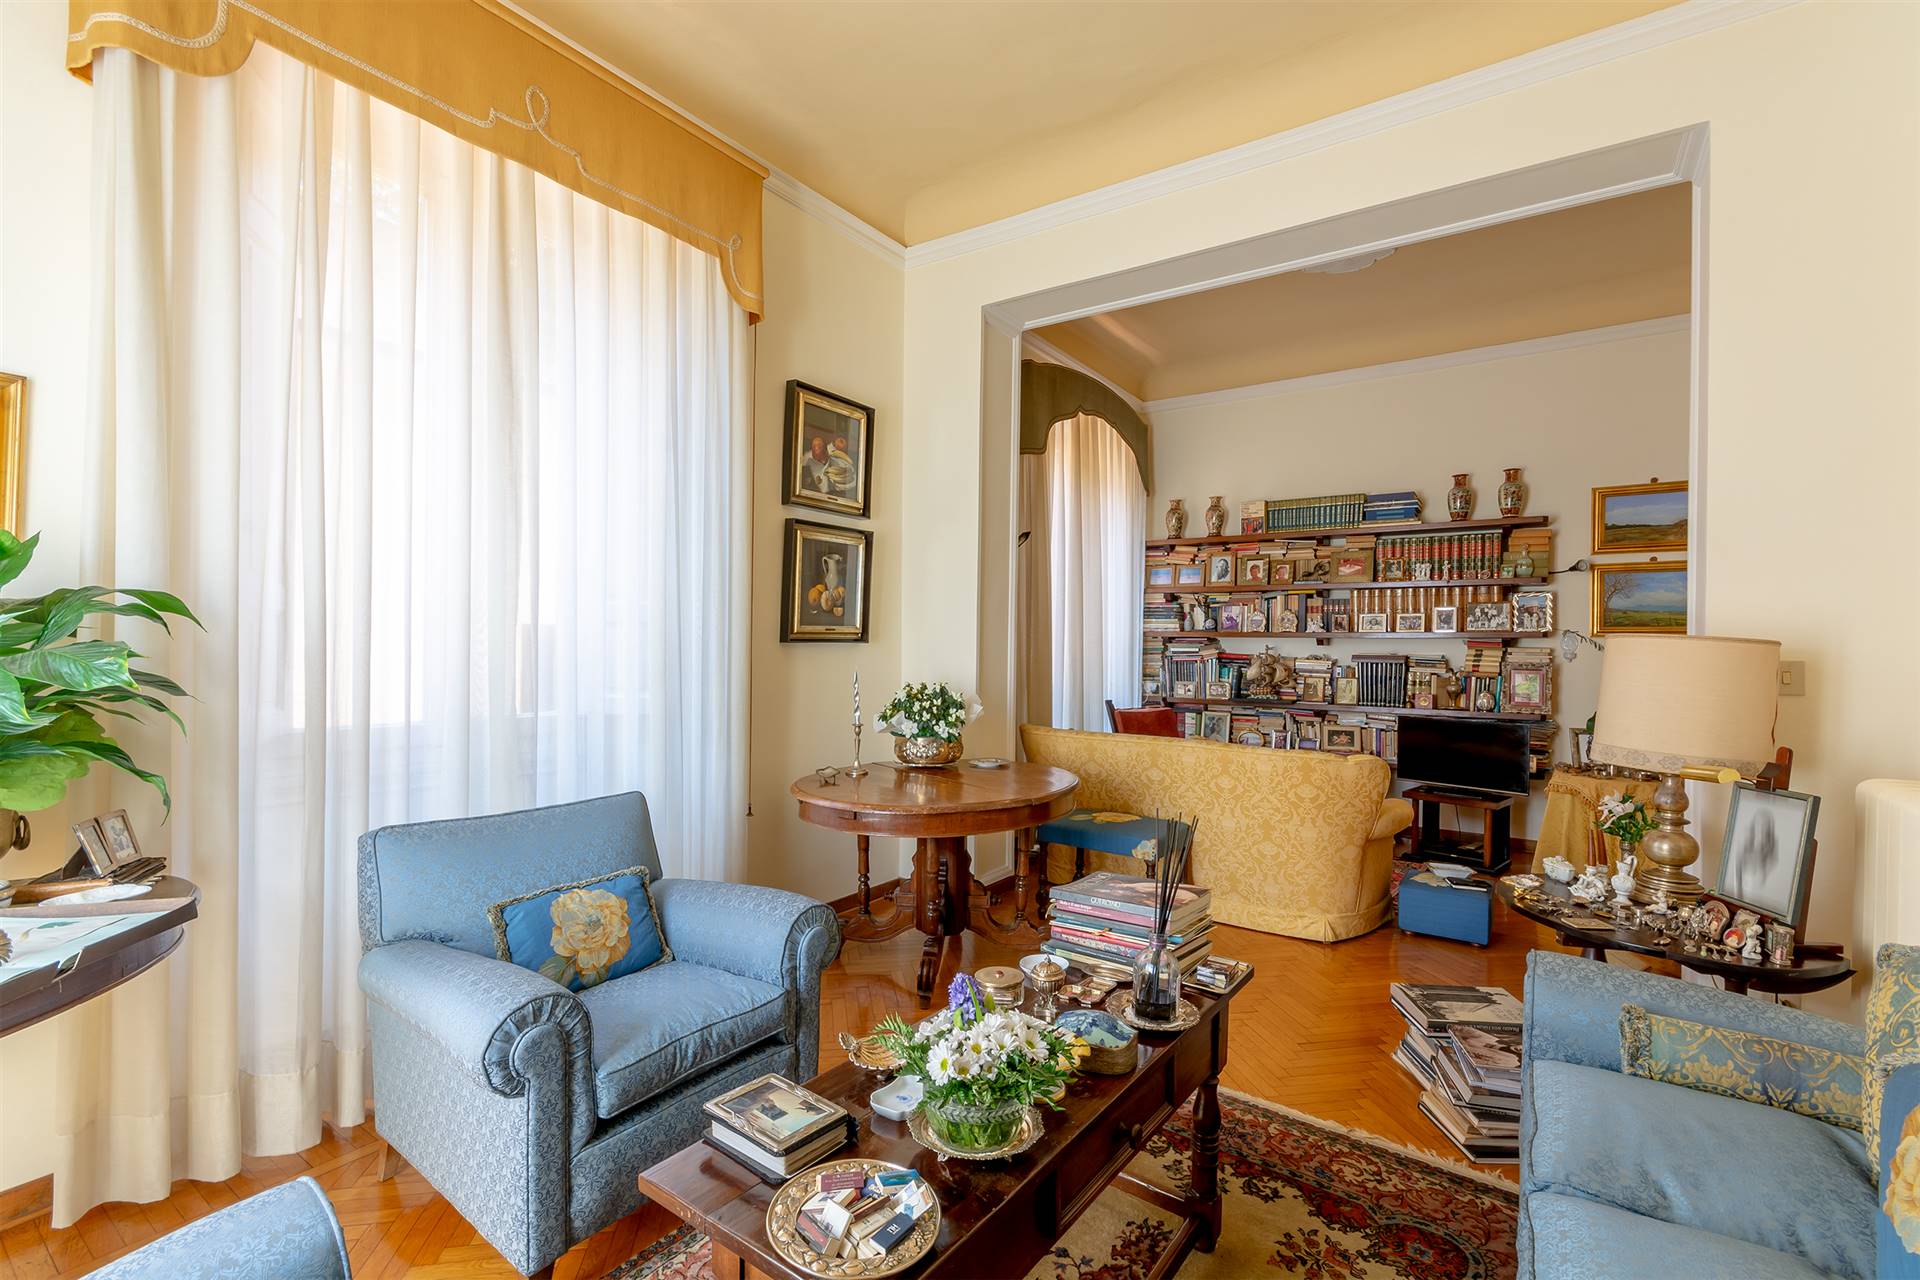 MAZZINI, FIRENZE, Apartment for sale of 129 Sq. mt., Excellent Condition, Heating Individual heating system, Energetic class: G, Epi: 175 kwh/m2 year,